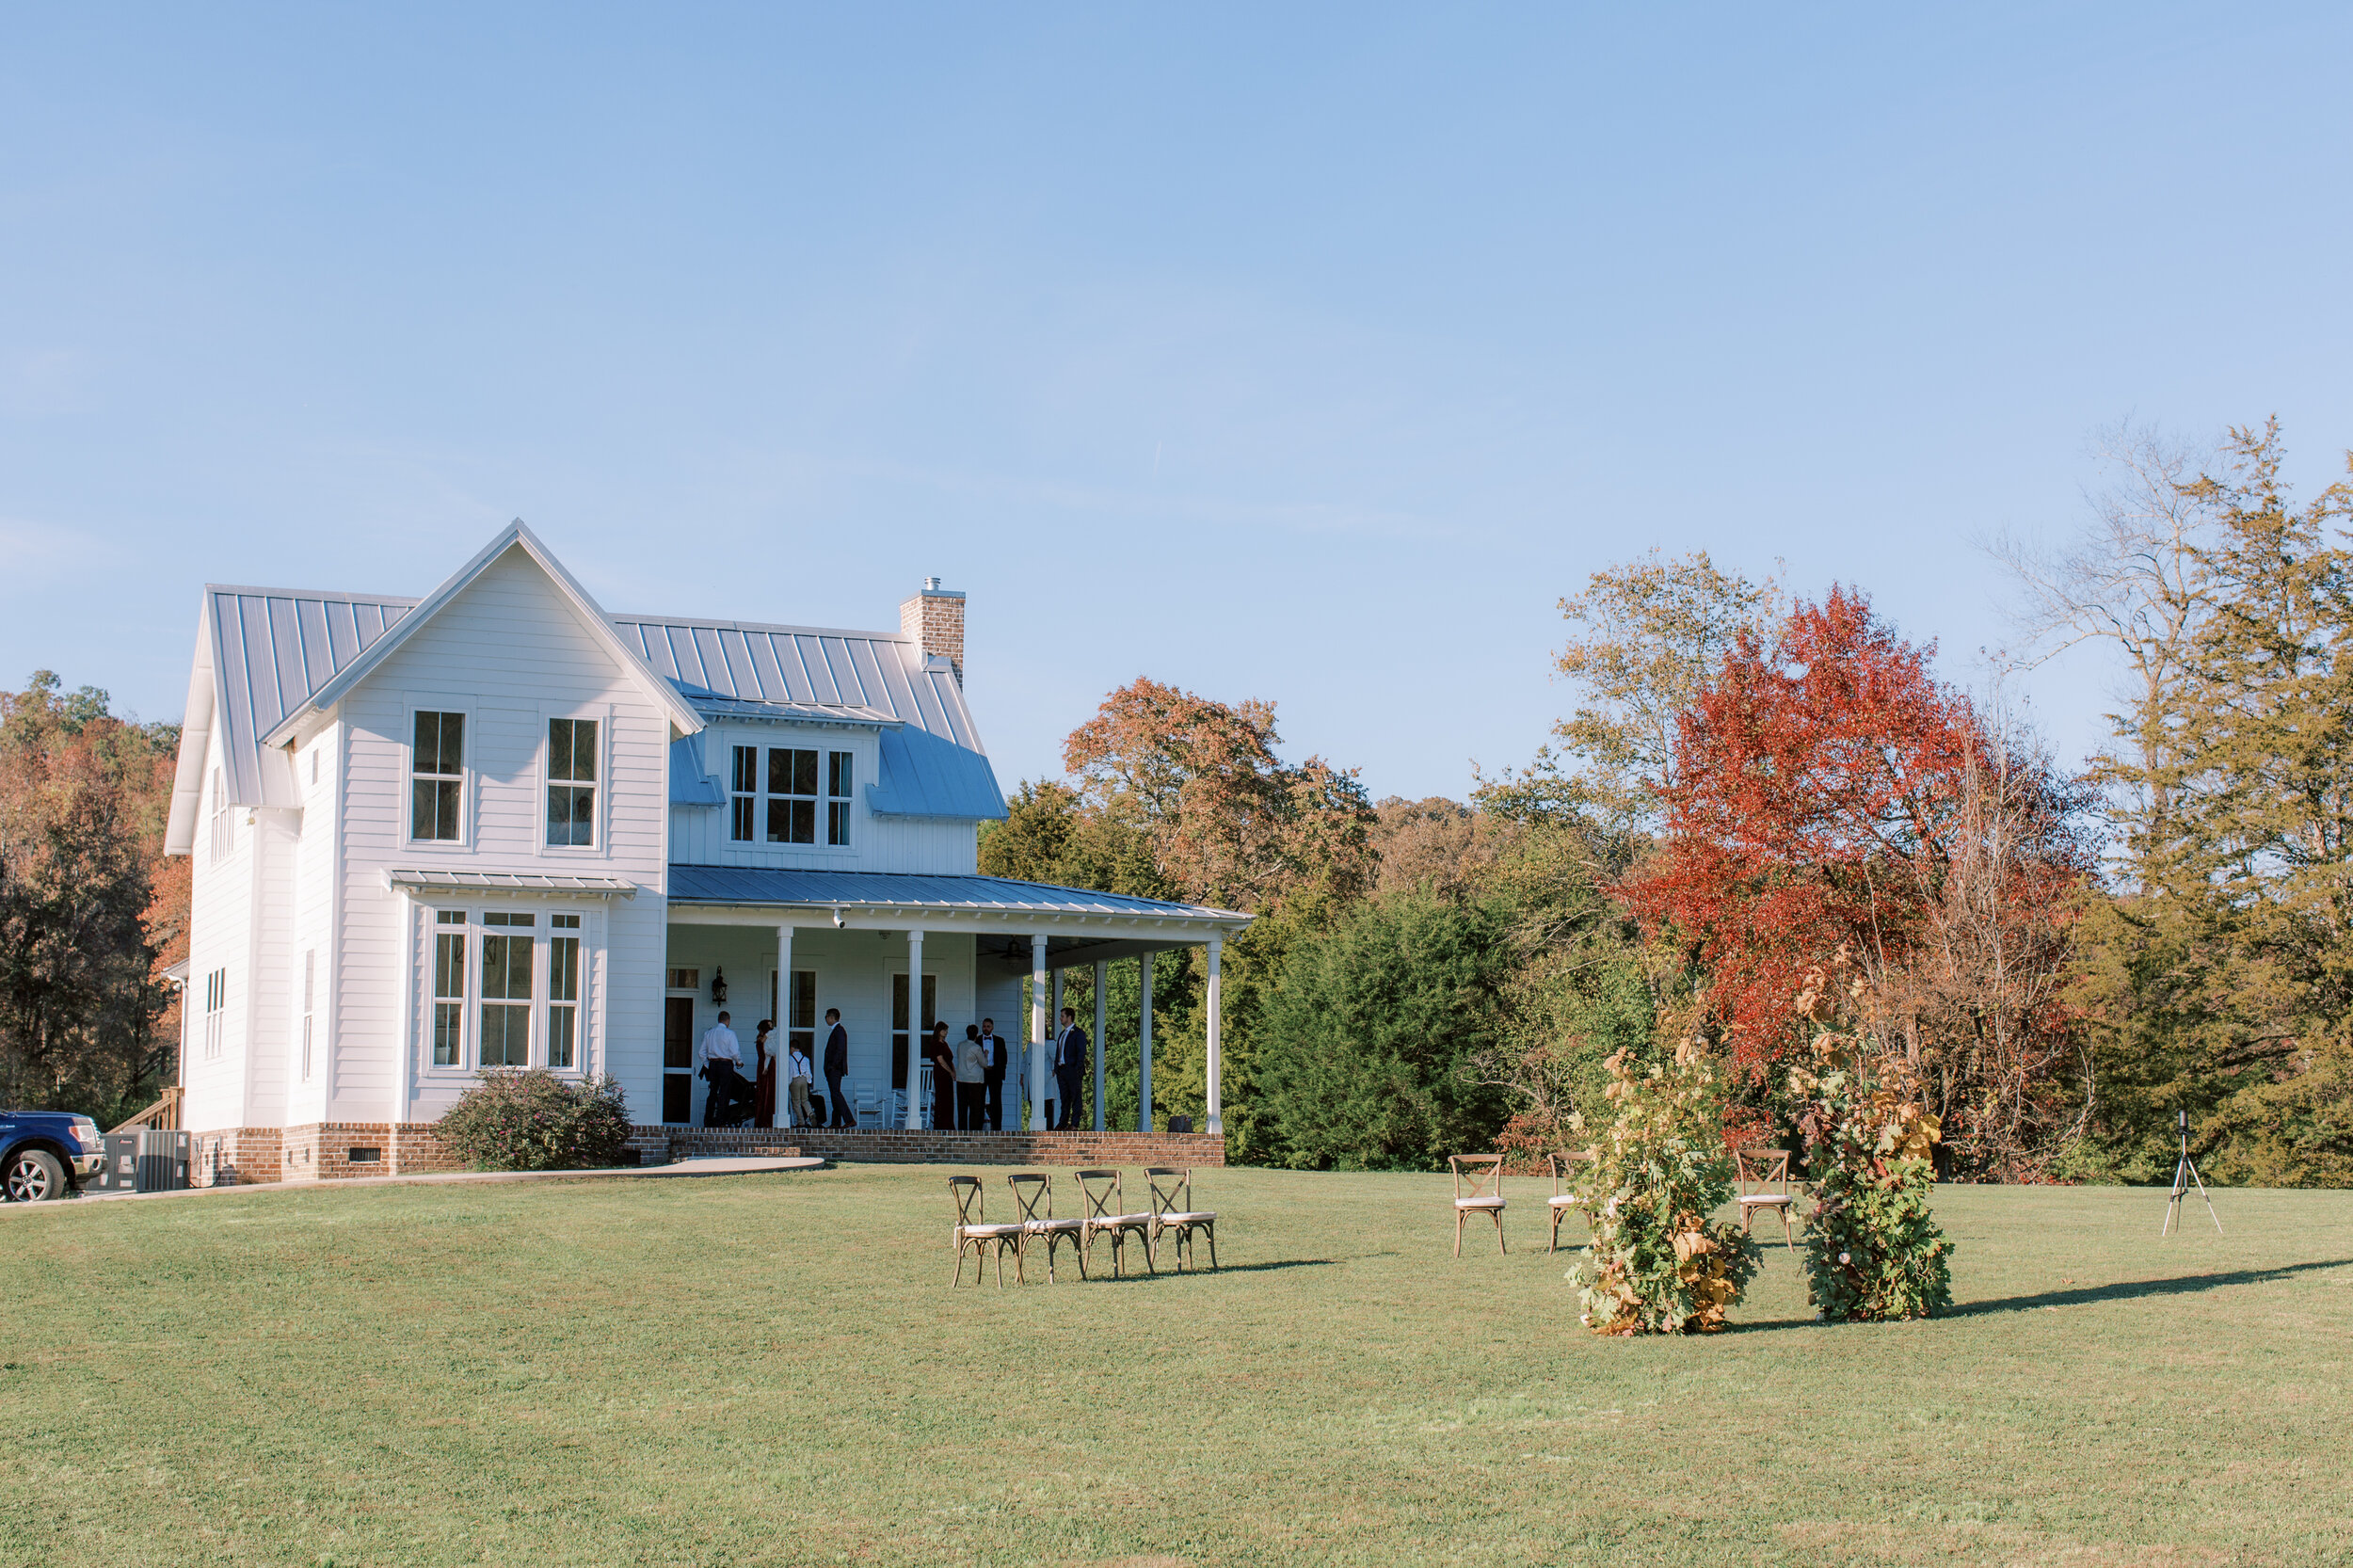 Morgan_Riley_Wedding_Tennessee_Farmhouse_KNoxville_Abigail_Malone_Photography-29.jpg